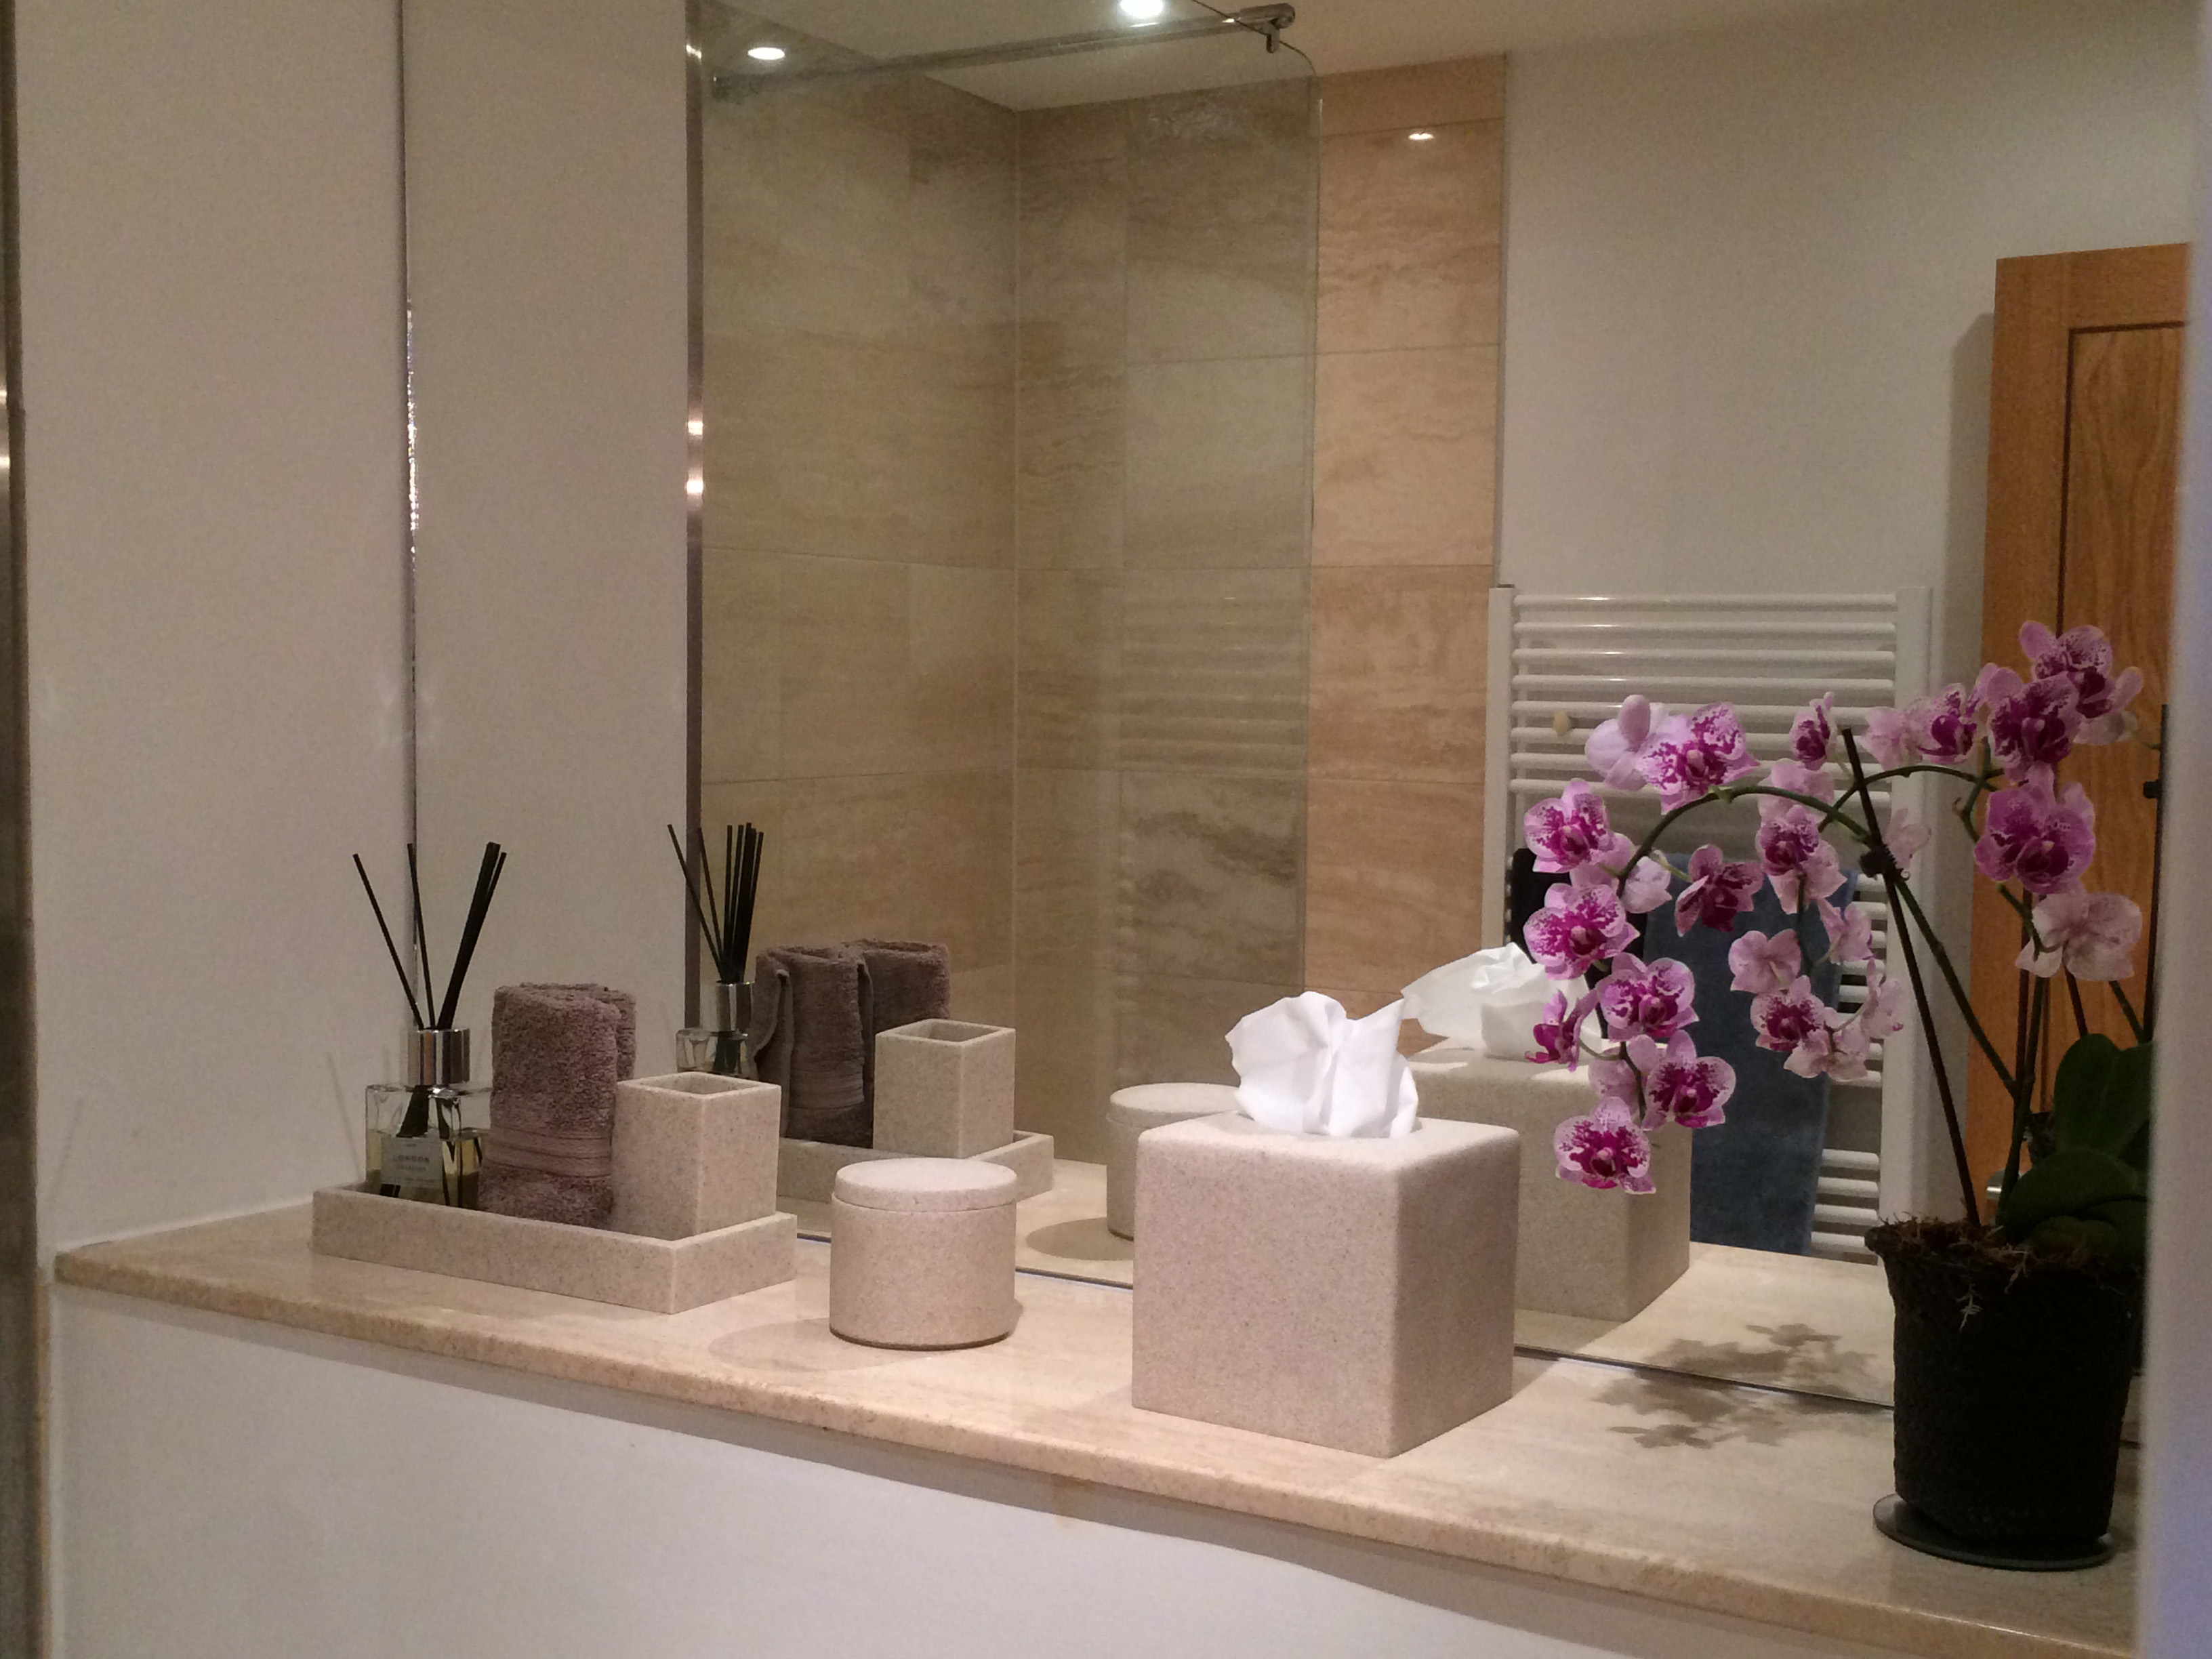 En-Suite interior design and styling details by Moji Salehi at Moji Interiors in Hove.